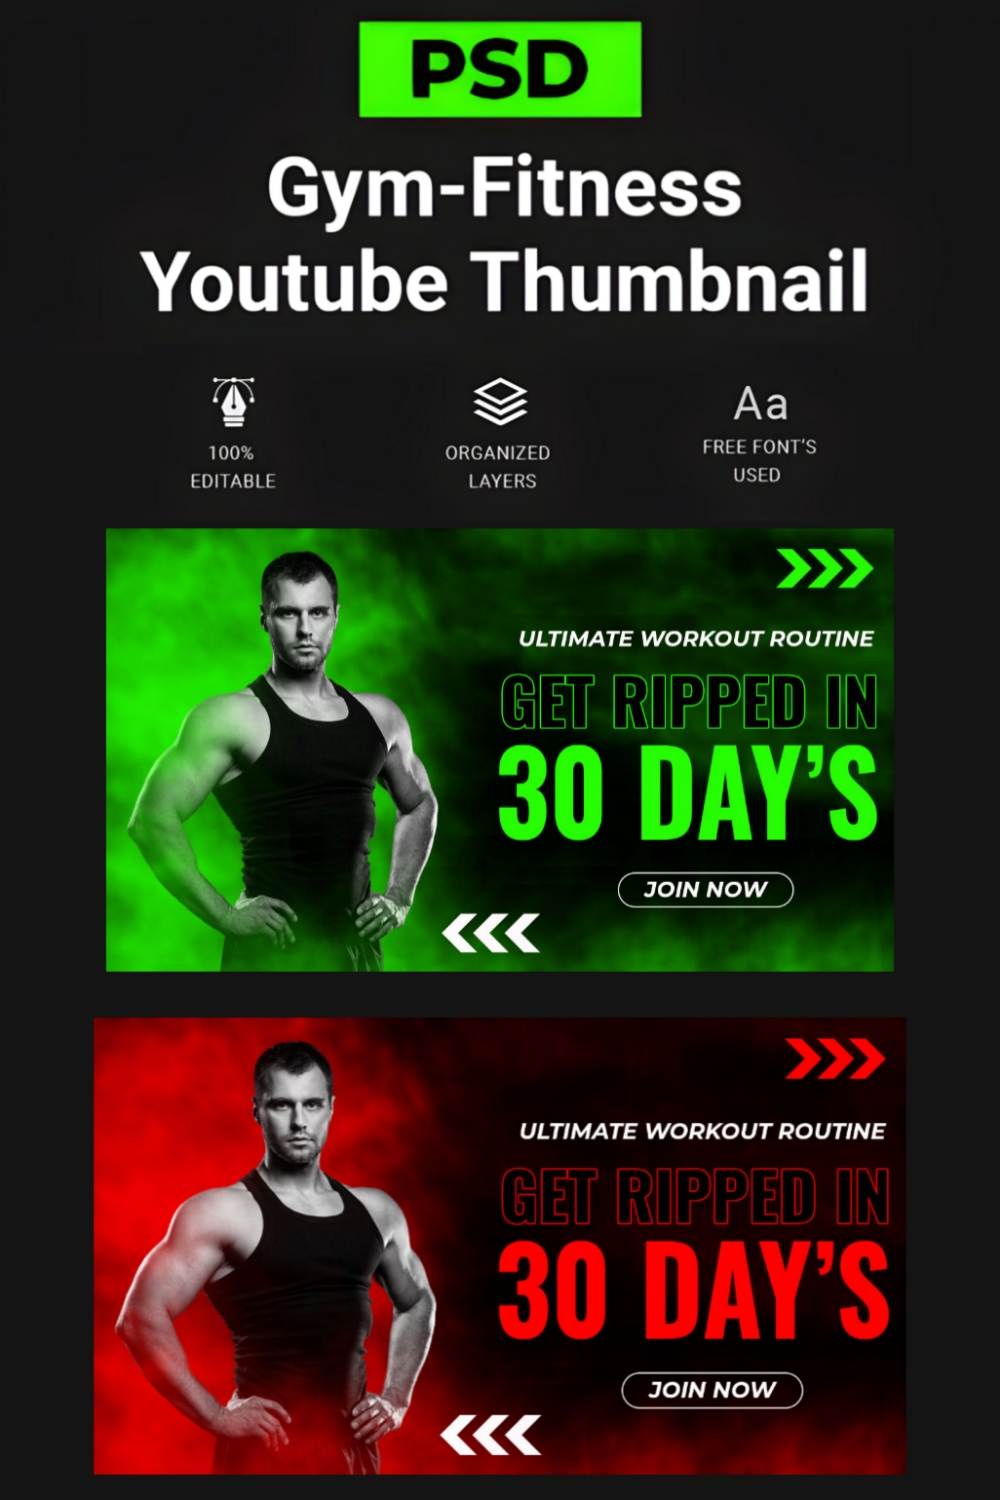 Gym-Fitness YouTube Thumbnail pinterest preview image.